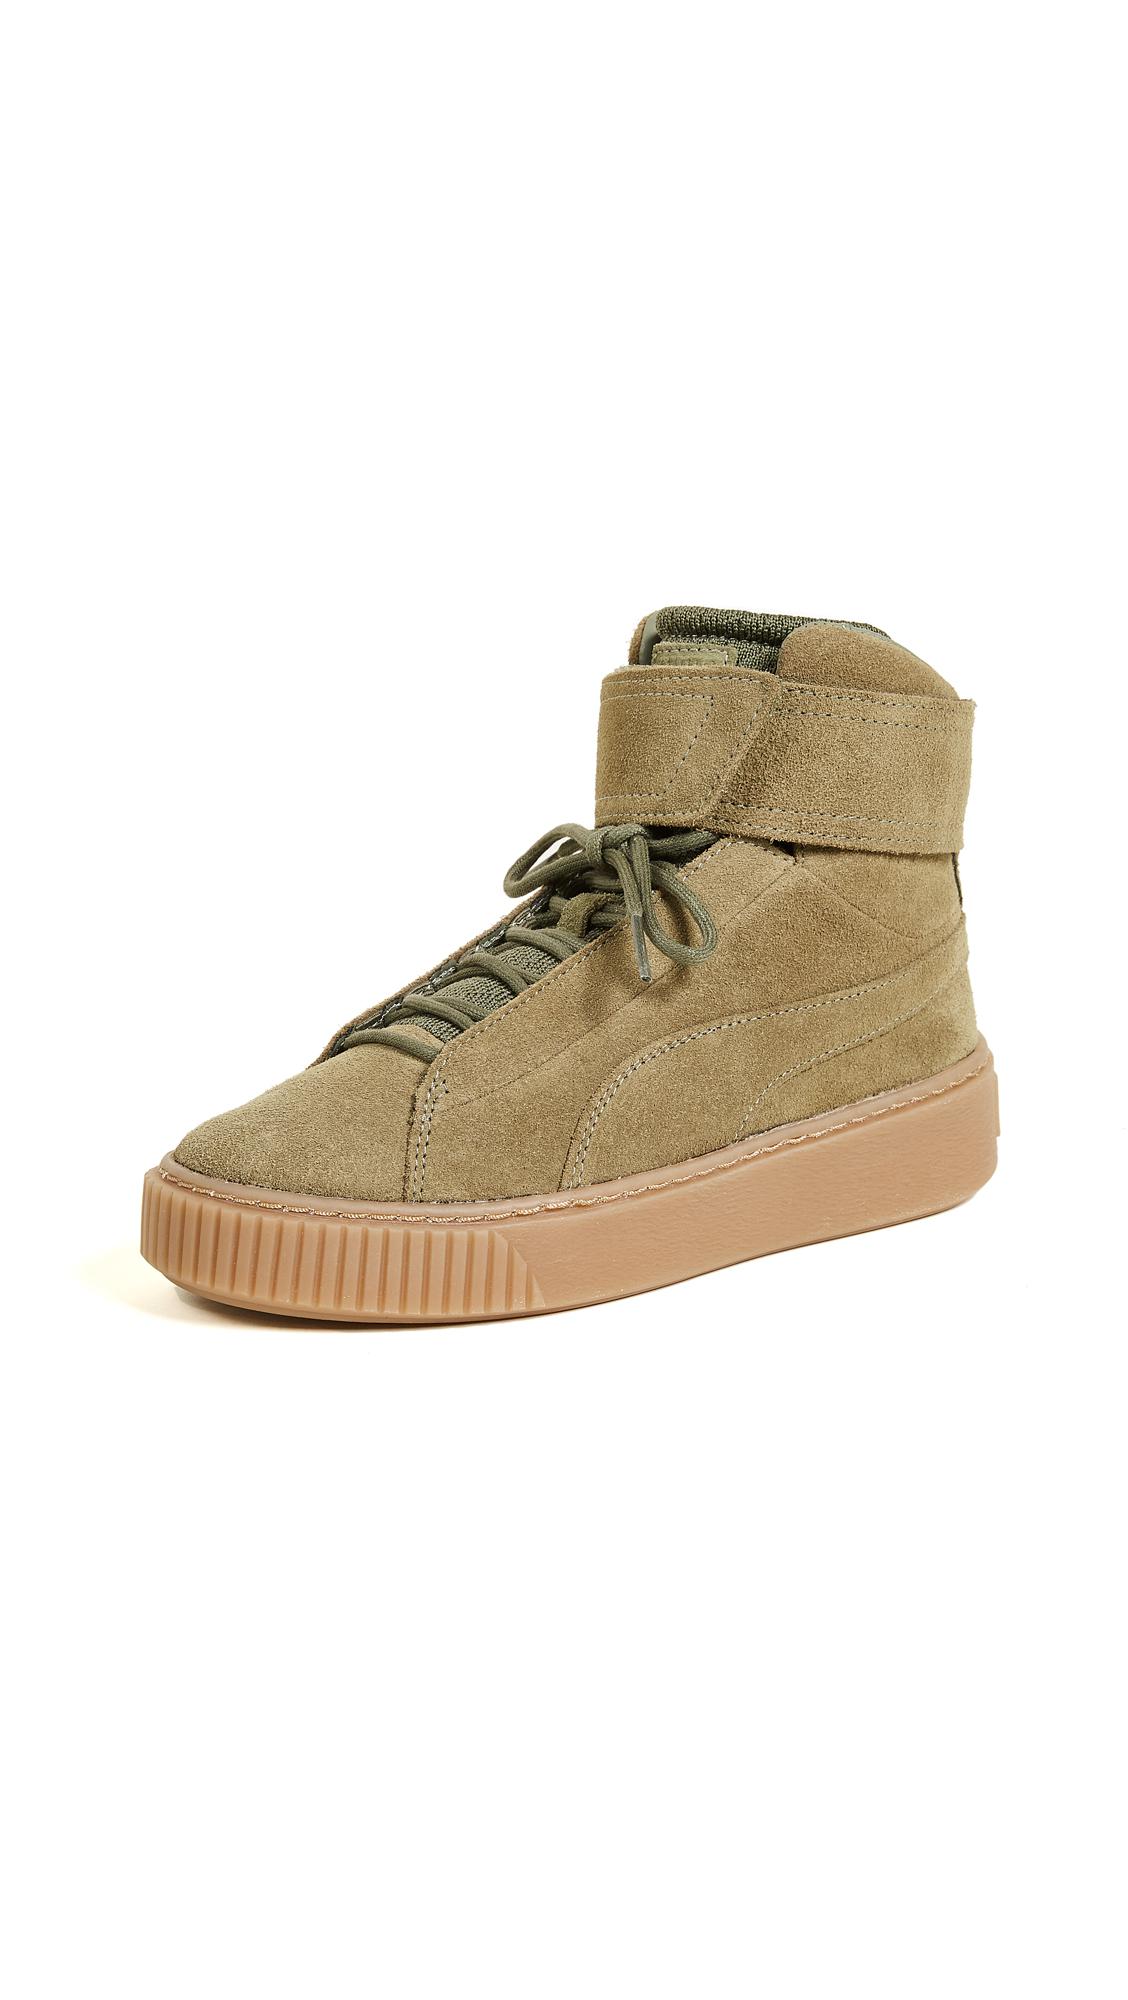 PUMA Suede Platform Mid Ow Sneakers in Olive Night/Olive Night (Green) |  Lyst